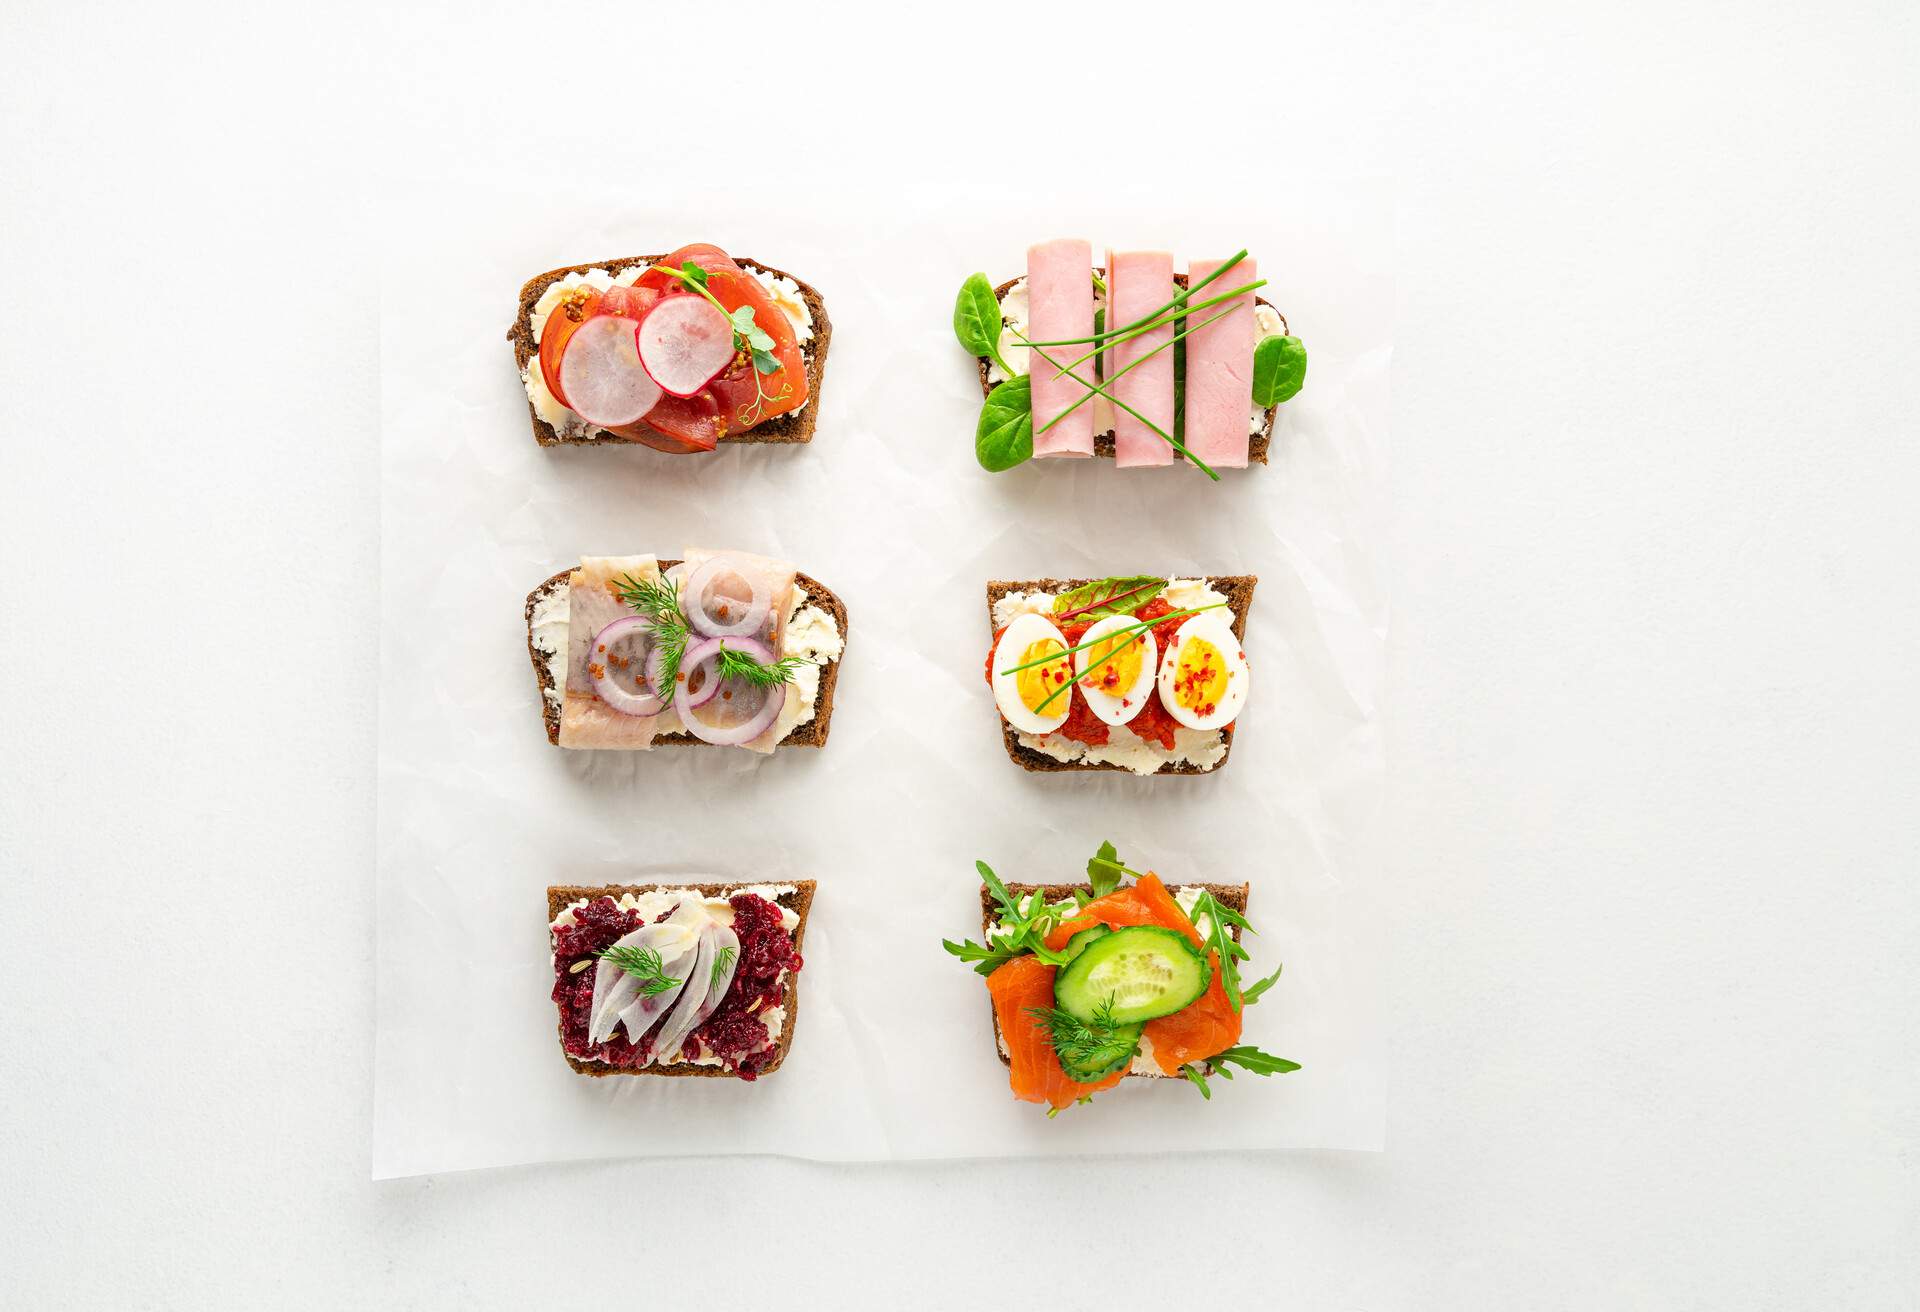 Selection of Danish smorrebrod open sandwiches on parchment paper on white background. Top view with copy space, horizontal orientation